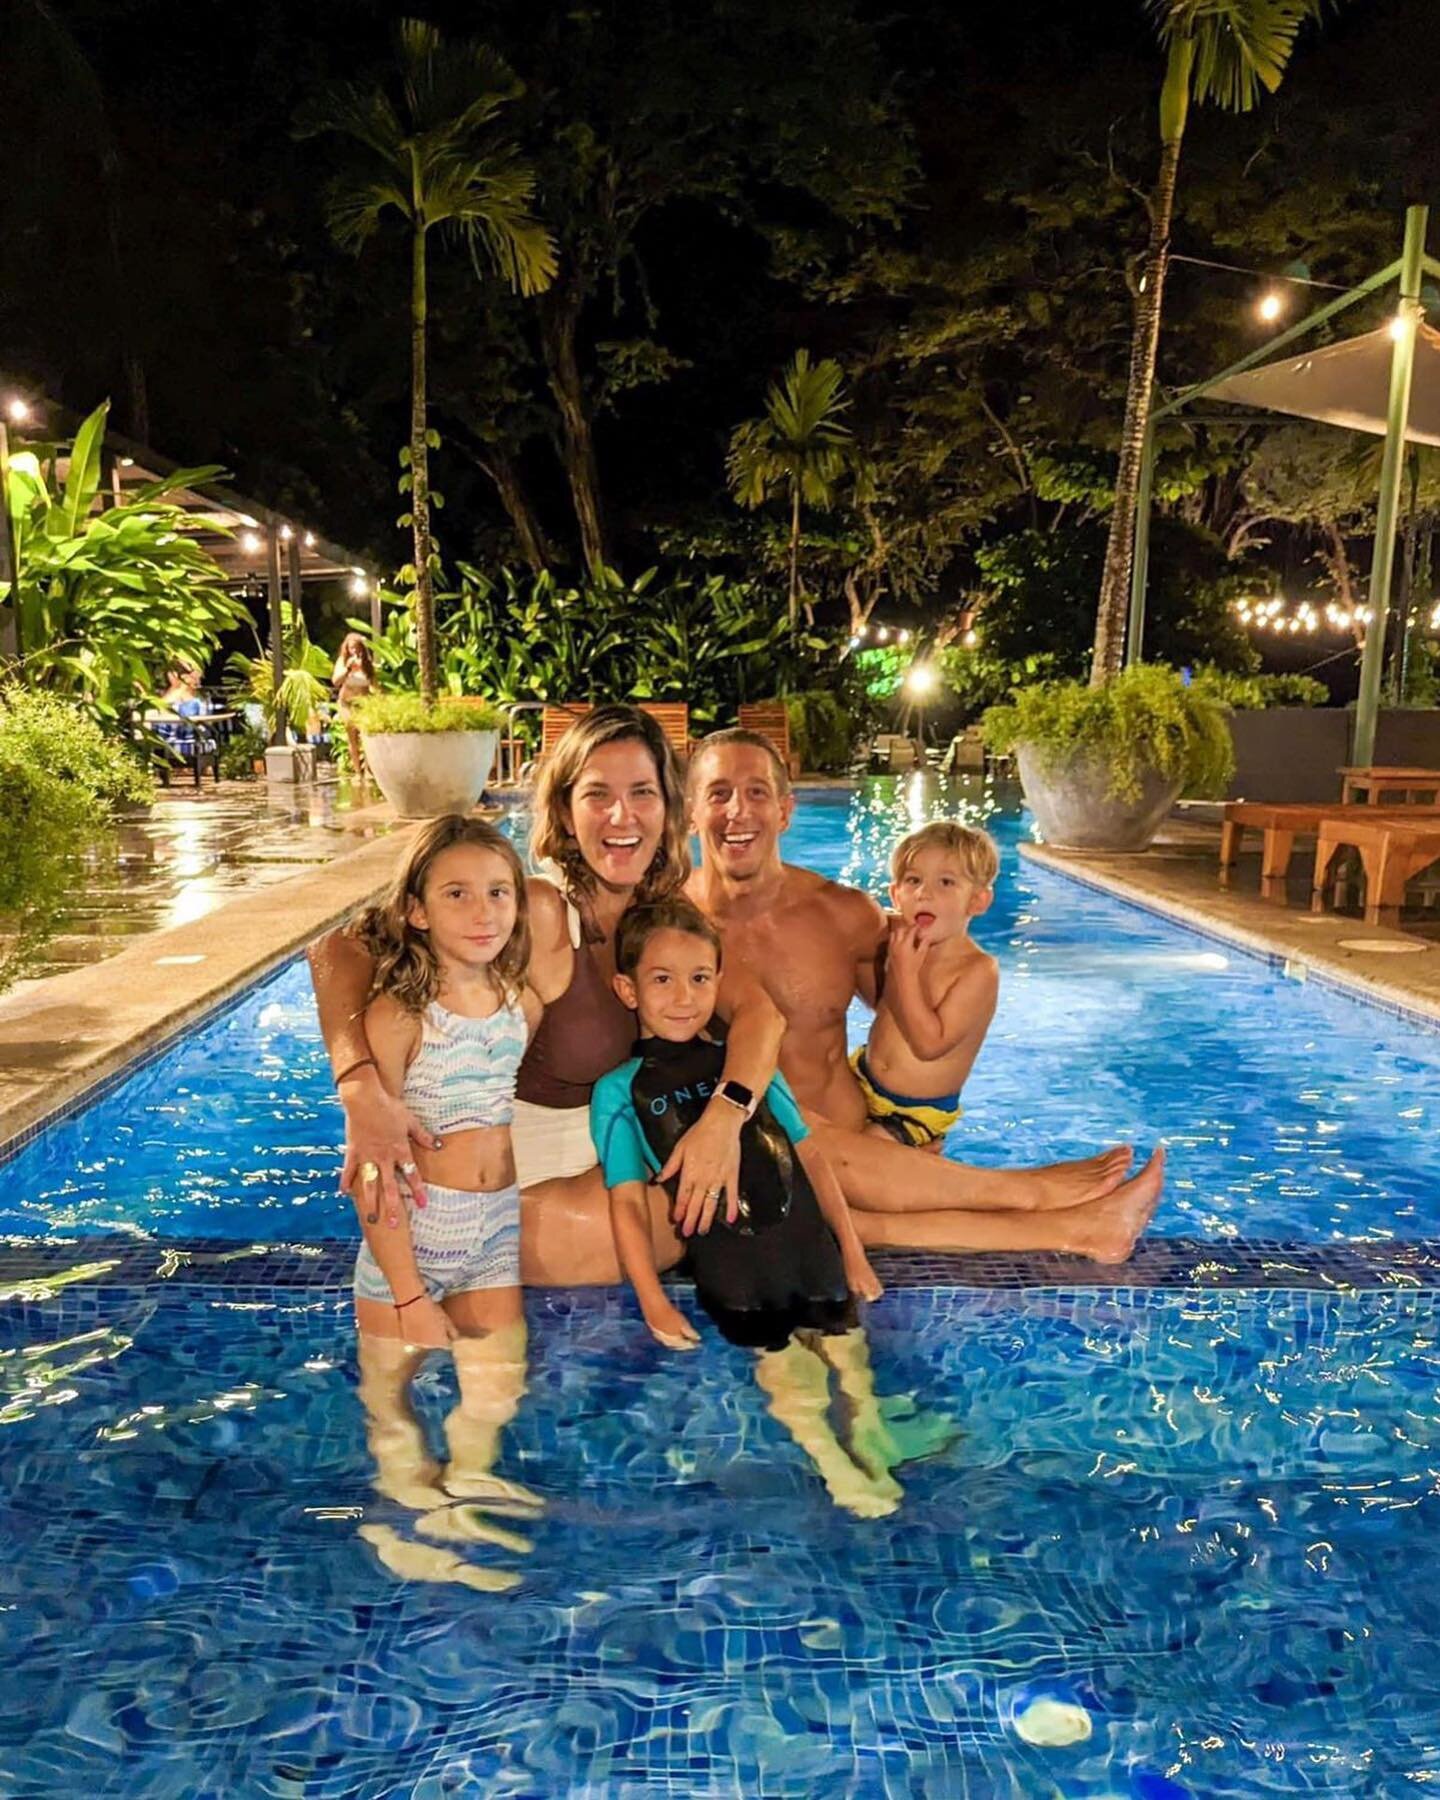 Are you looking for the ultimate family night out? 🤩

The Langosta Beach Club has you covered. With great cocktails, fresh smoothies, and a big pool for the whole family, everyone is sure to have a great time!🙌